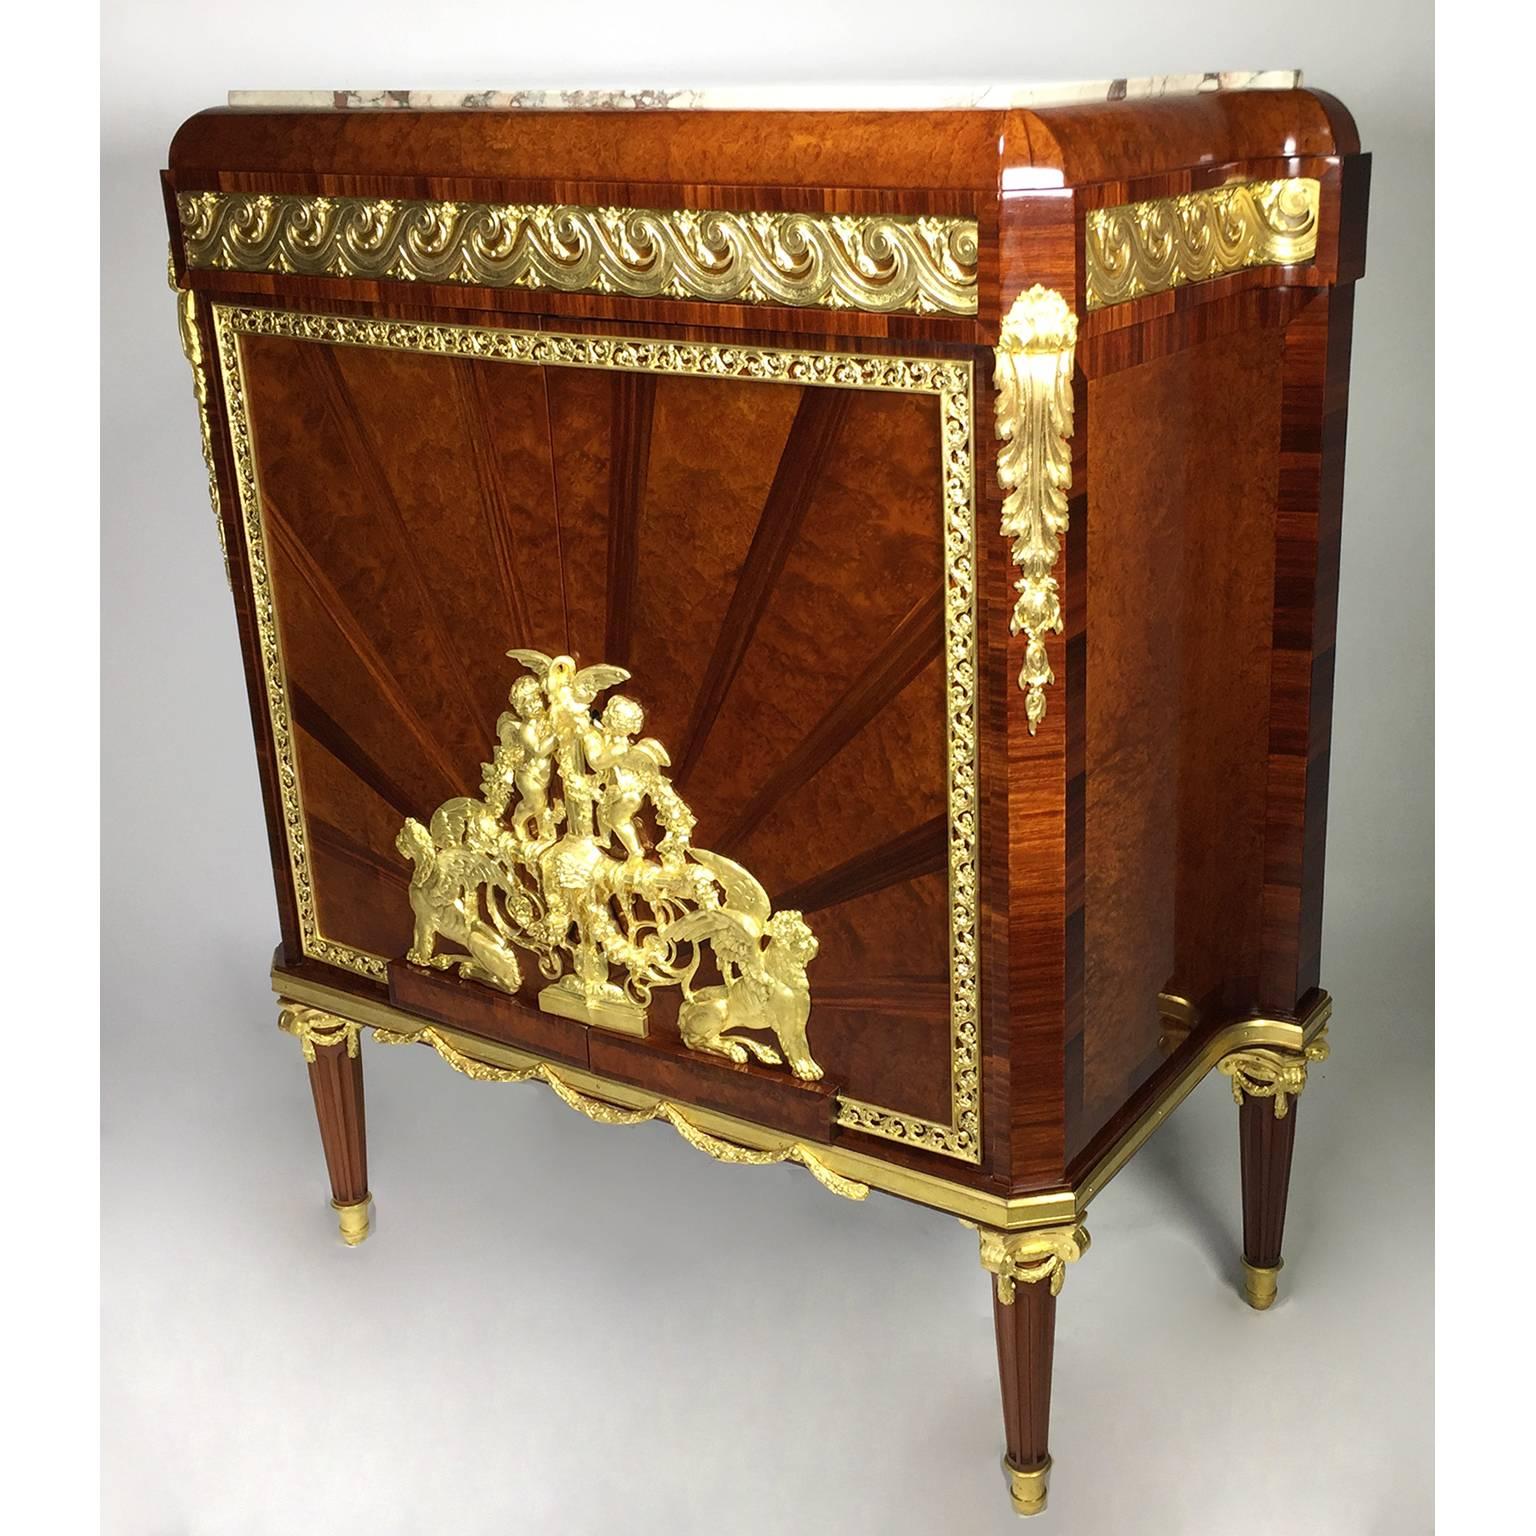 A very fine and rare French 19th-20th century Louis XVI style Belle Epoque ormolu-mounted satine, kingwood and burlwood two-door cabinet, the mounts by Ferdinand Barbedienne, fitted with a shaped Breccia Colorata marble top above a Vitruvian scroll